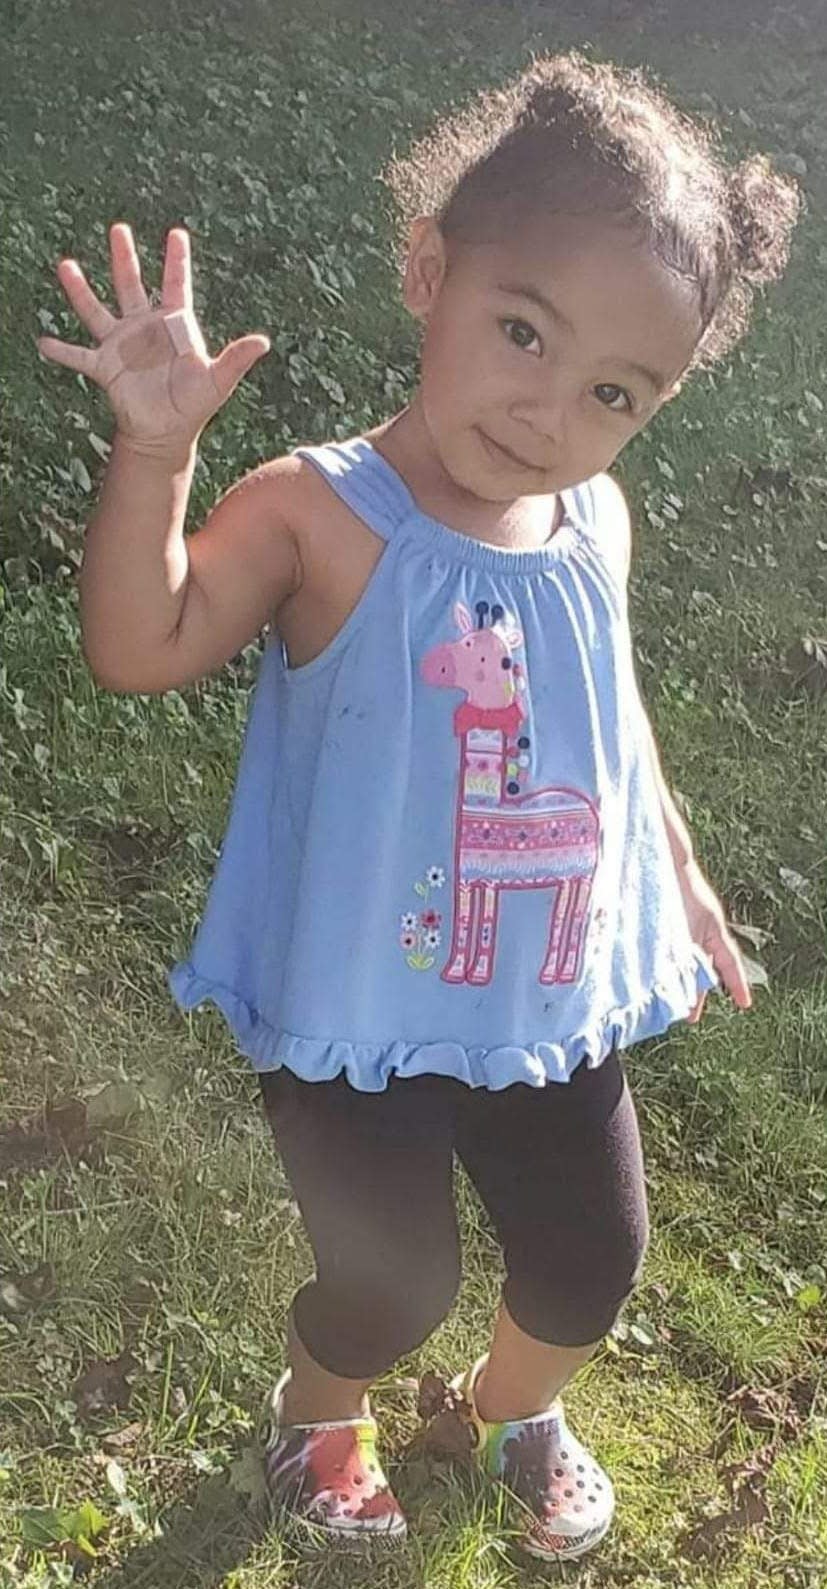 Nalani Johnson was one of 12 children who were abducted and found dead after an Amber Alert was activated, according to media reports about their cases.